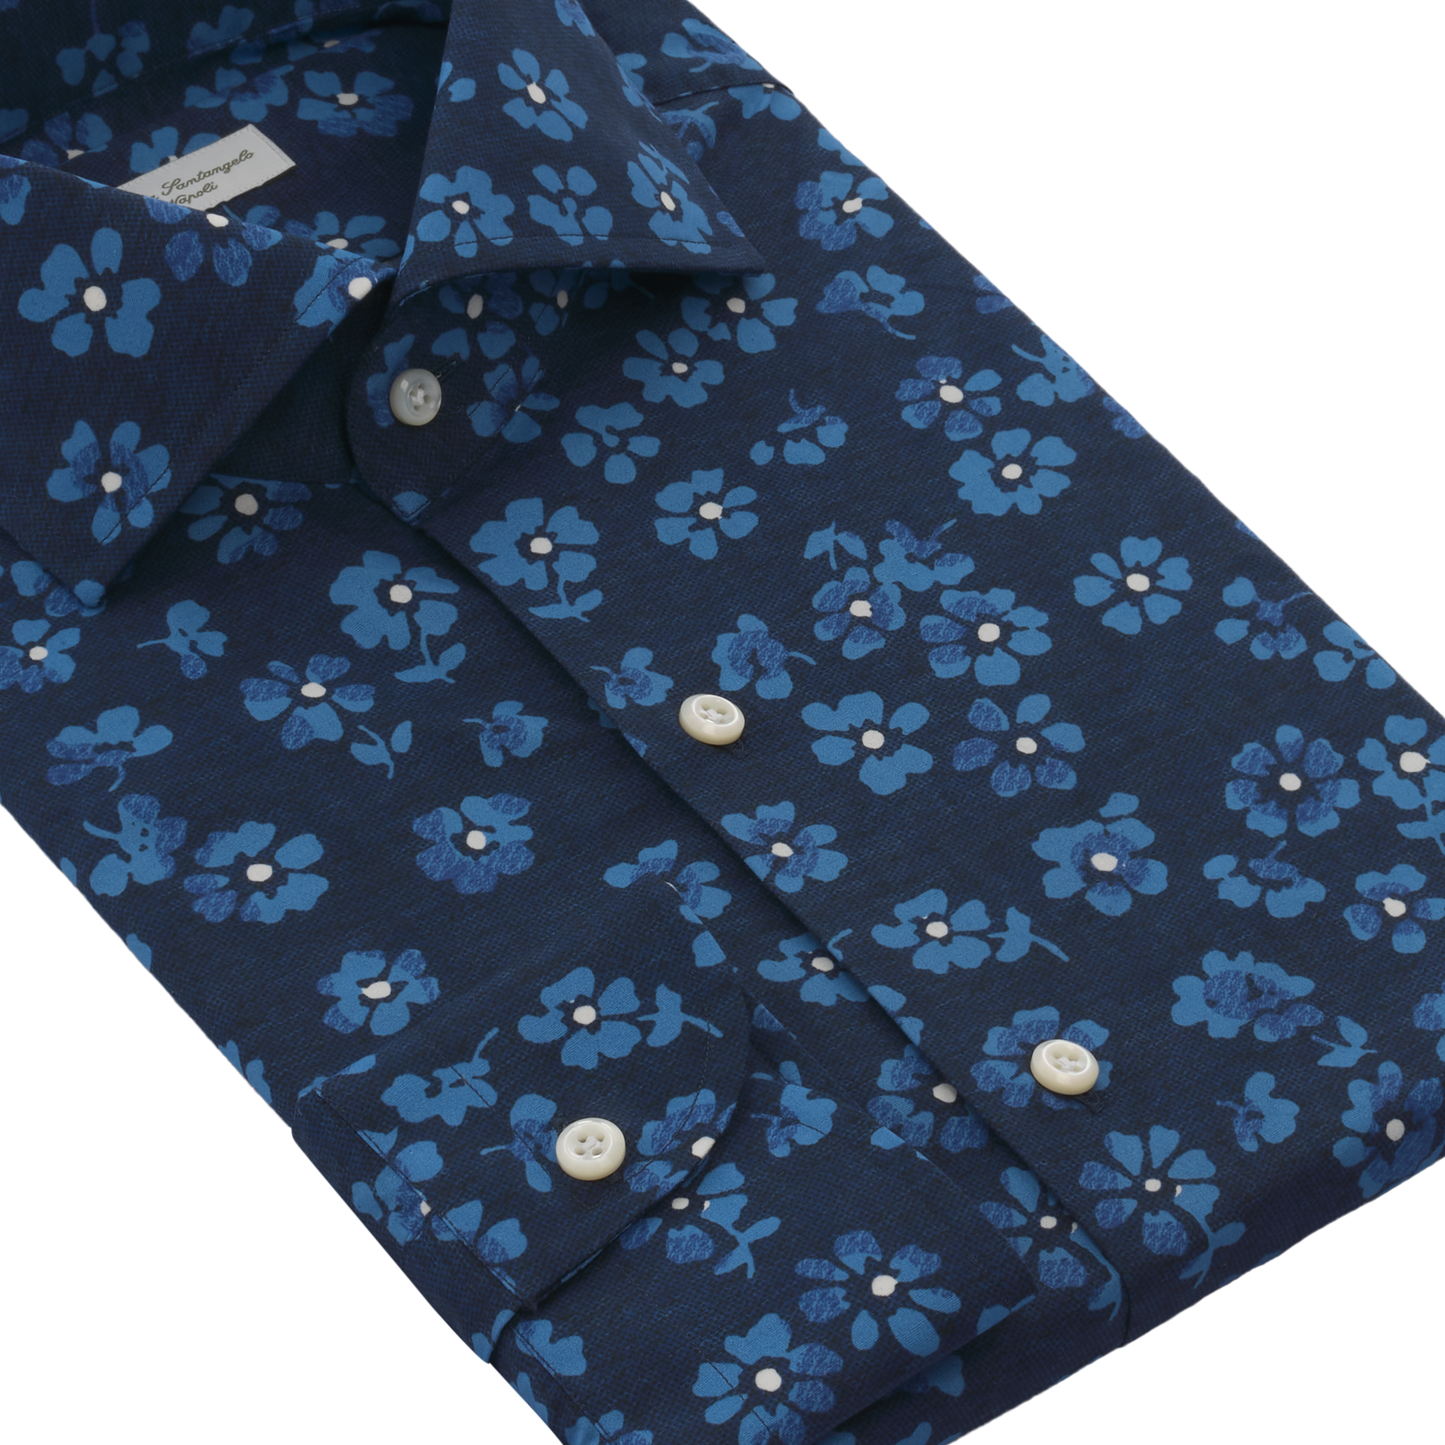 Floral Printed Cotton Shirt in Navy Blue